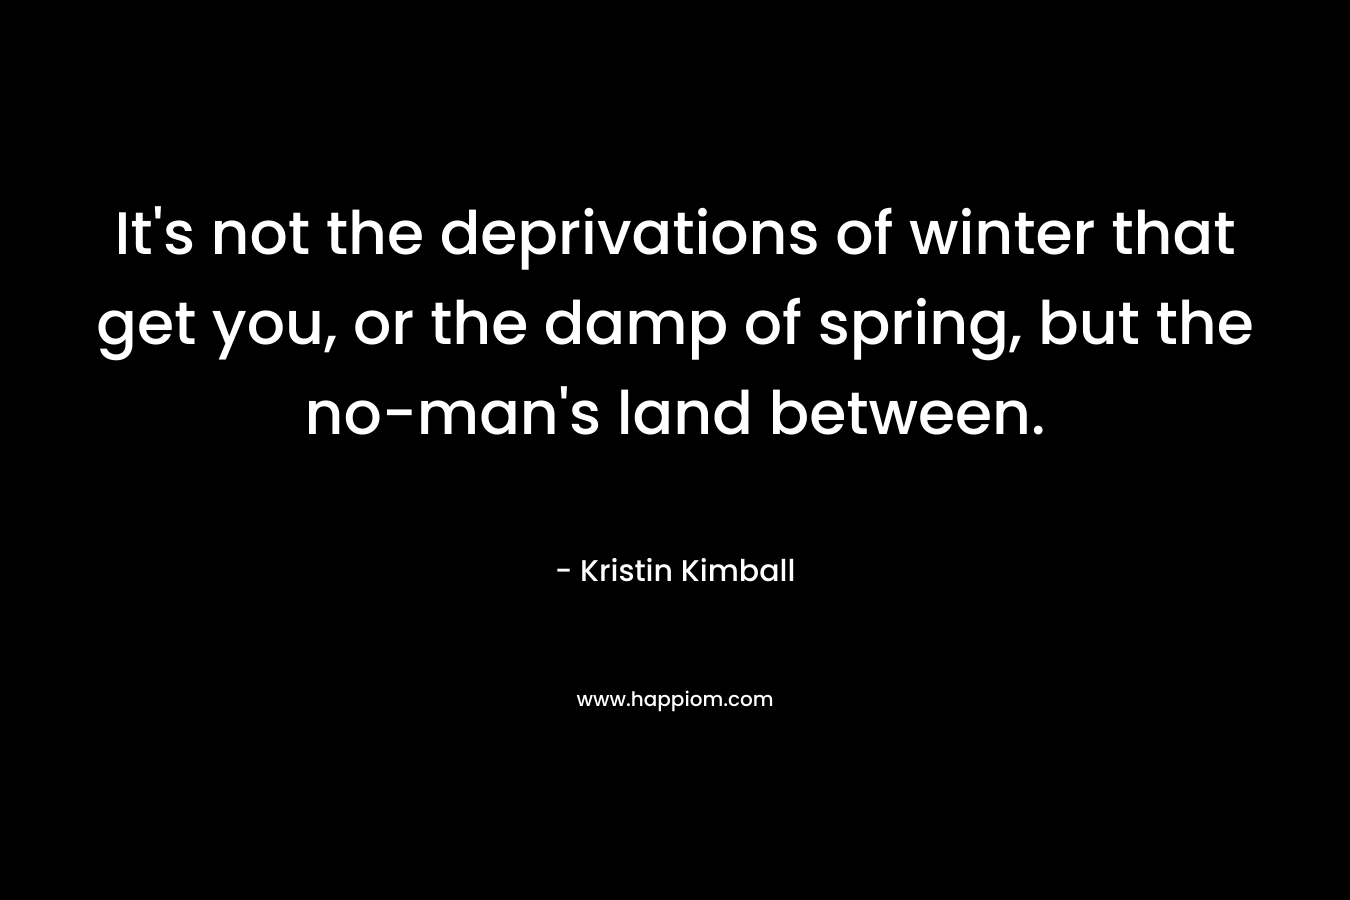 It’s not the deprivations of winter that get you, or the damp of spring, but the no-man’s land between. – Kristin Kimball